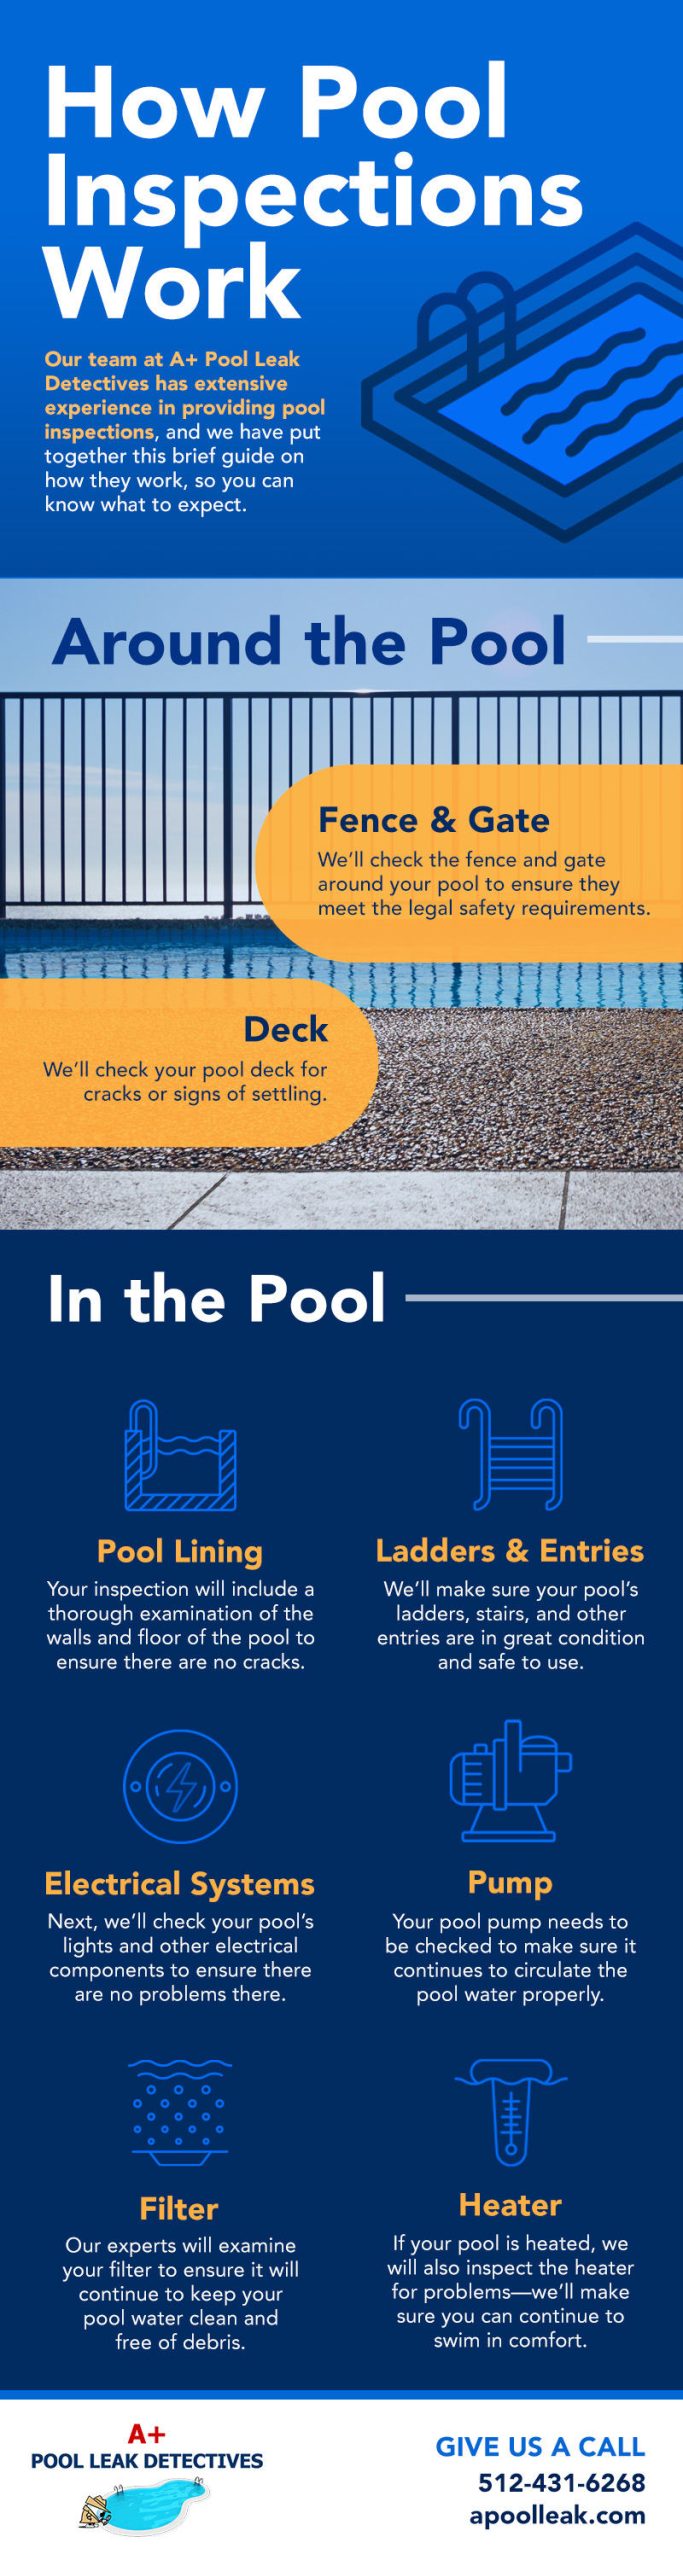 How Pool Inspections Work [infographic]